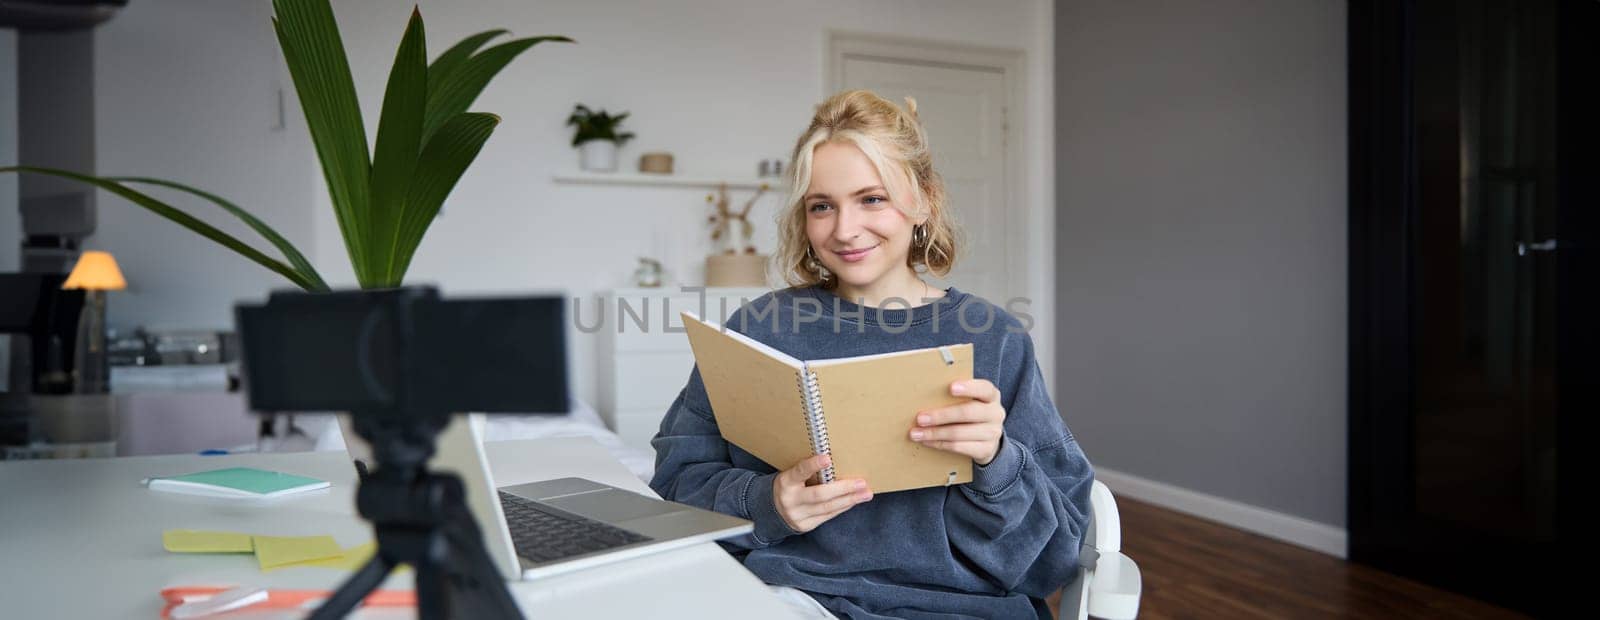 Young smiling blond woman, sits near laptop, uses digital camera to record video blog, creates lifestyle content for social media, records tutorial, shows notebook, reads her notes.